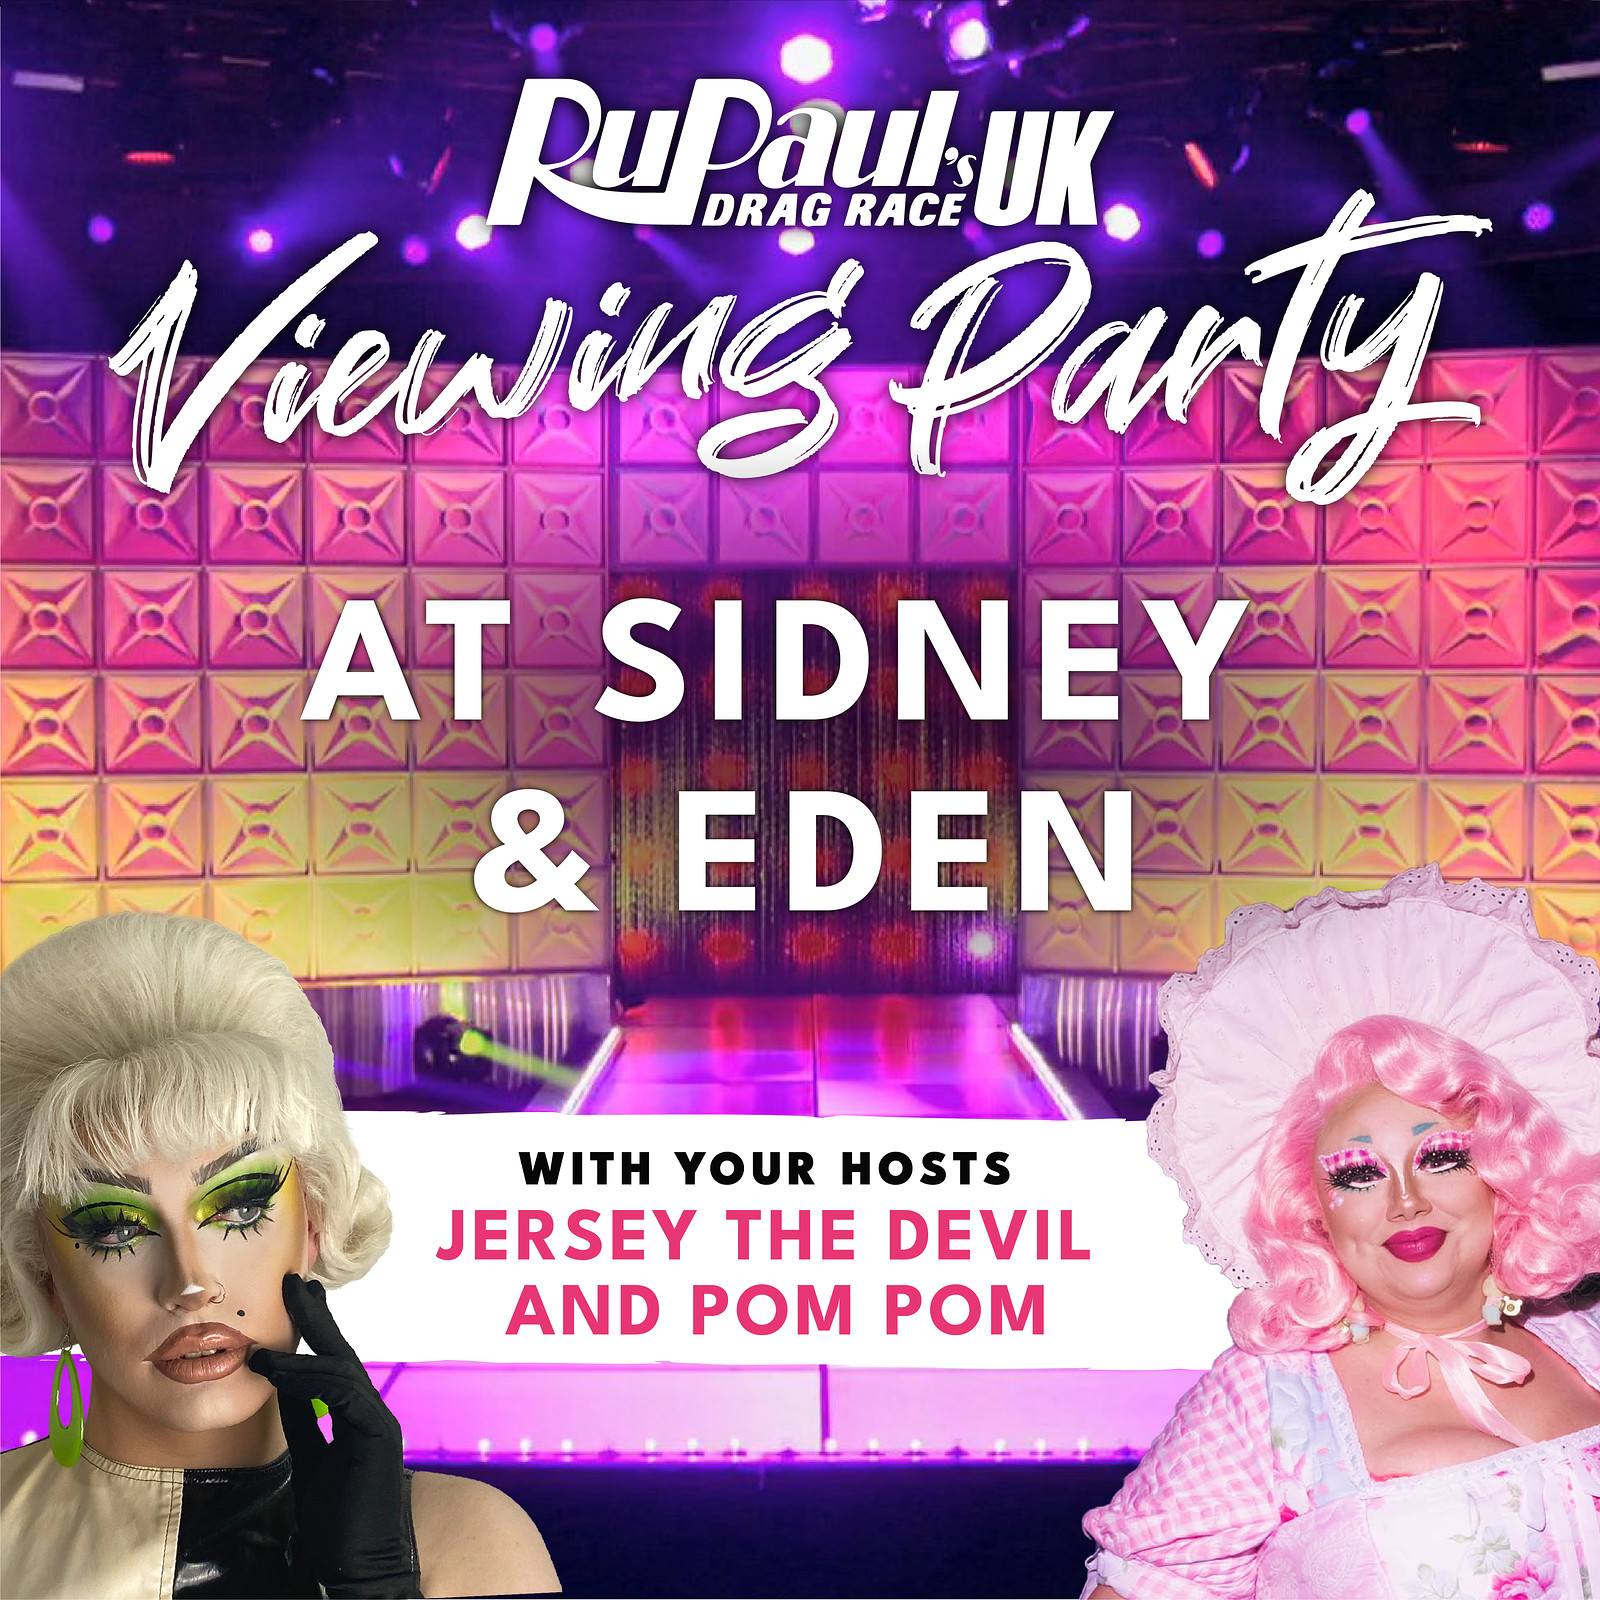 RuPaul's Drag Race UK Episode 6 Viewing Party at Sidney & Eden